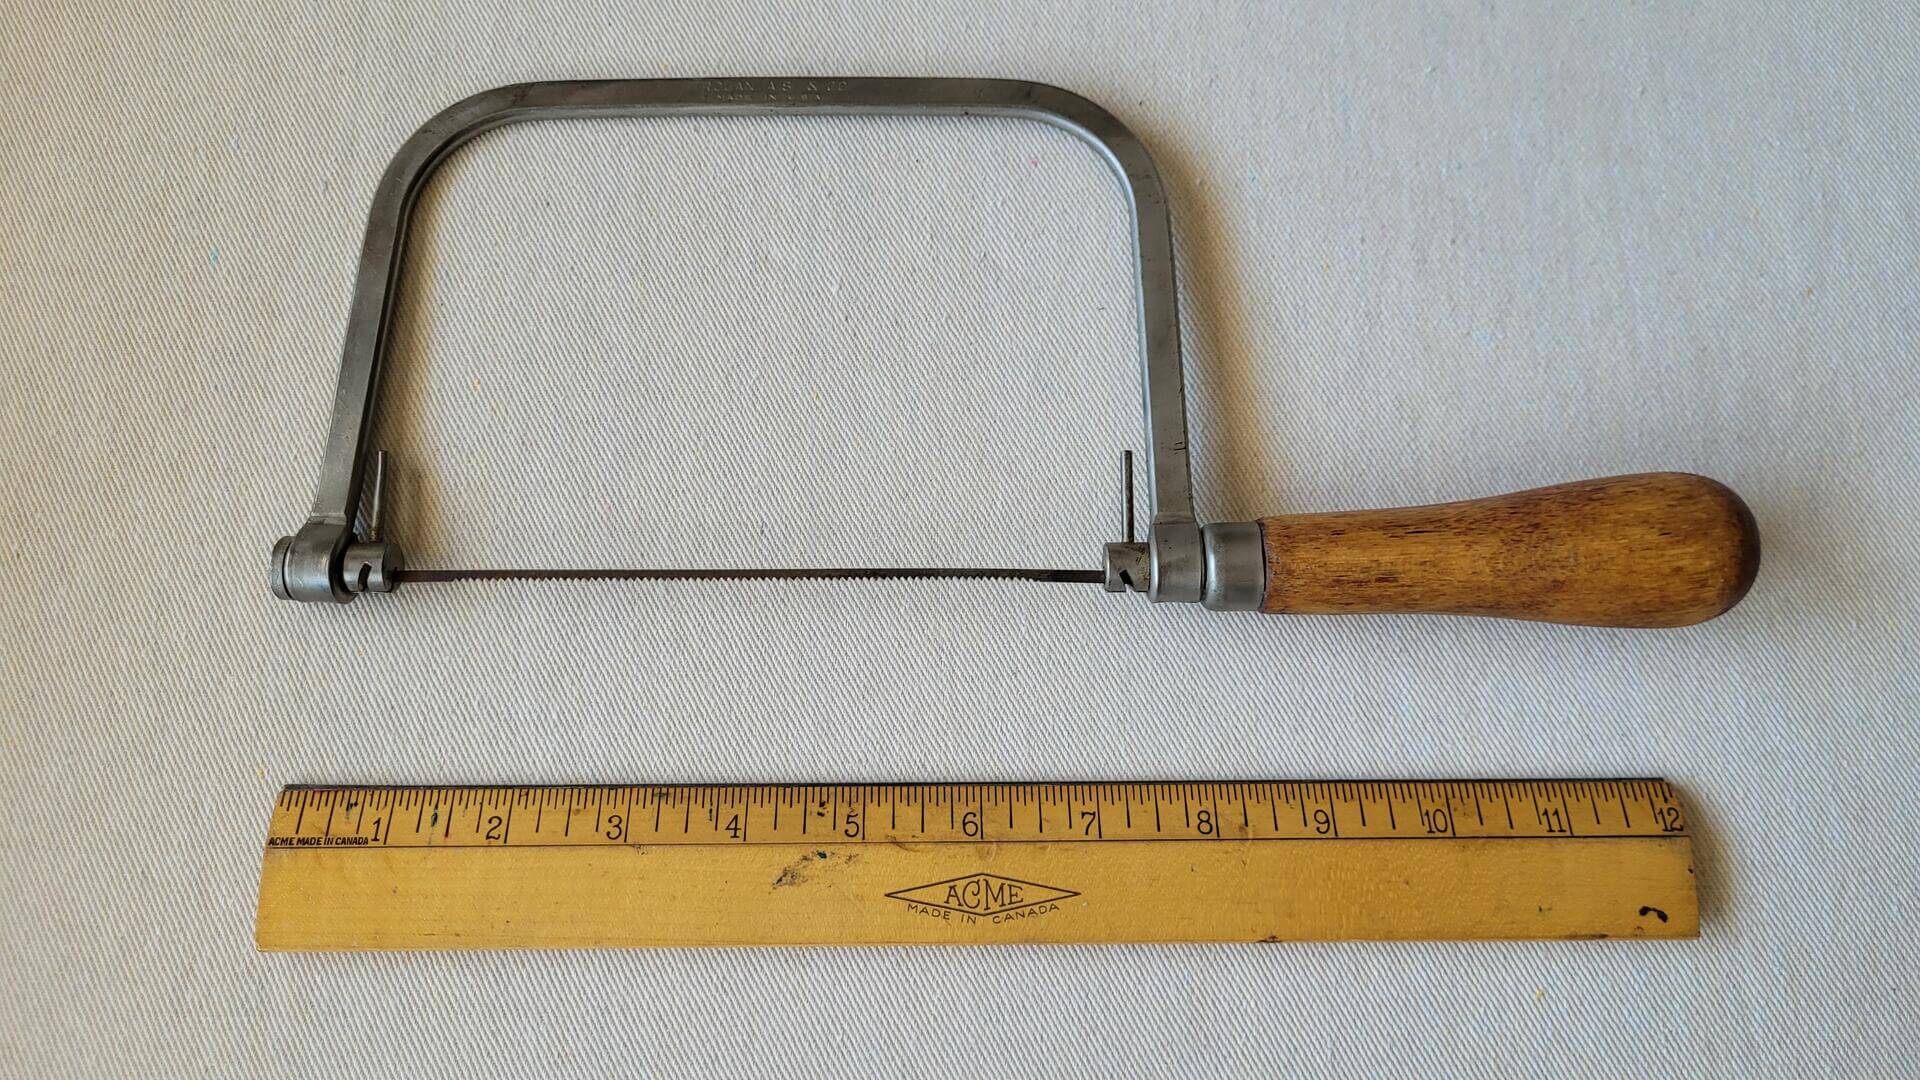 trojan-as-co-coping-scroll-saw-vintage-antique-made-in-usa-collectible-woodworking-jewelry-cutting-hand-tools-measurements